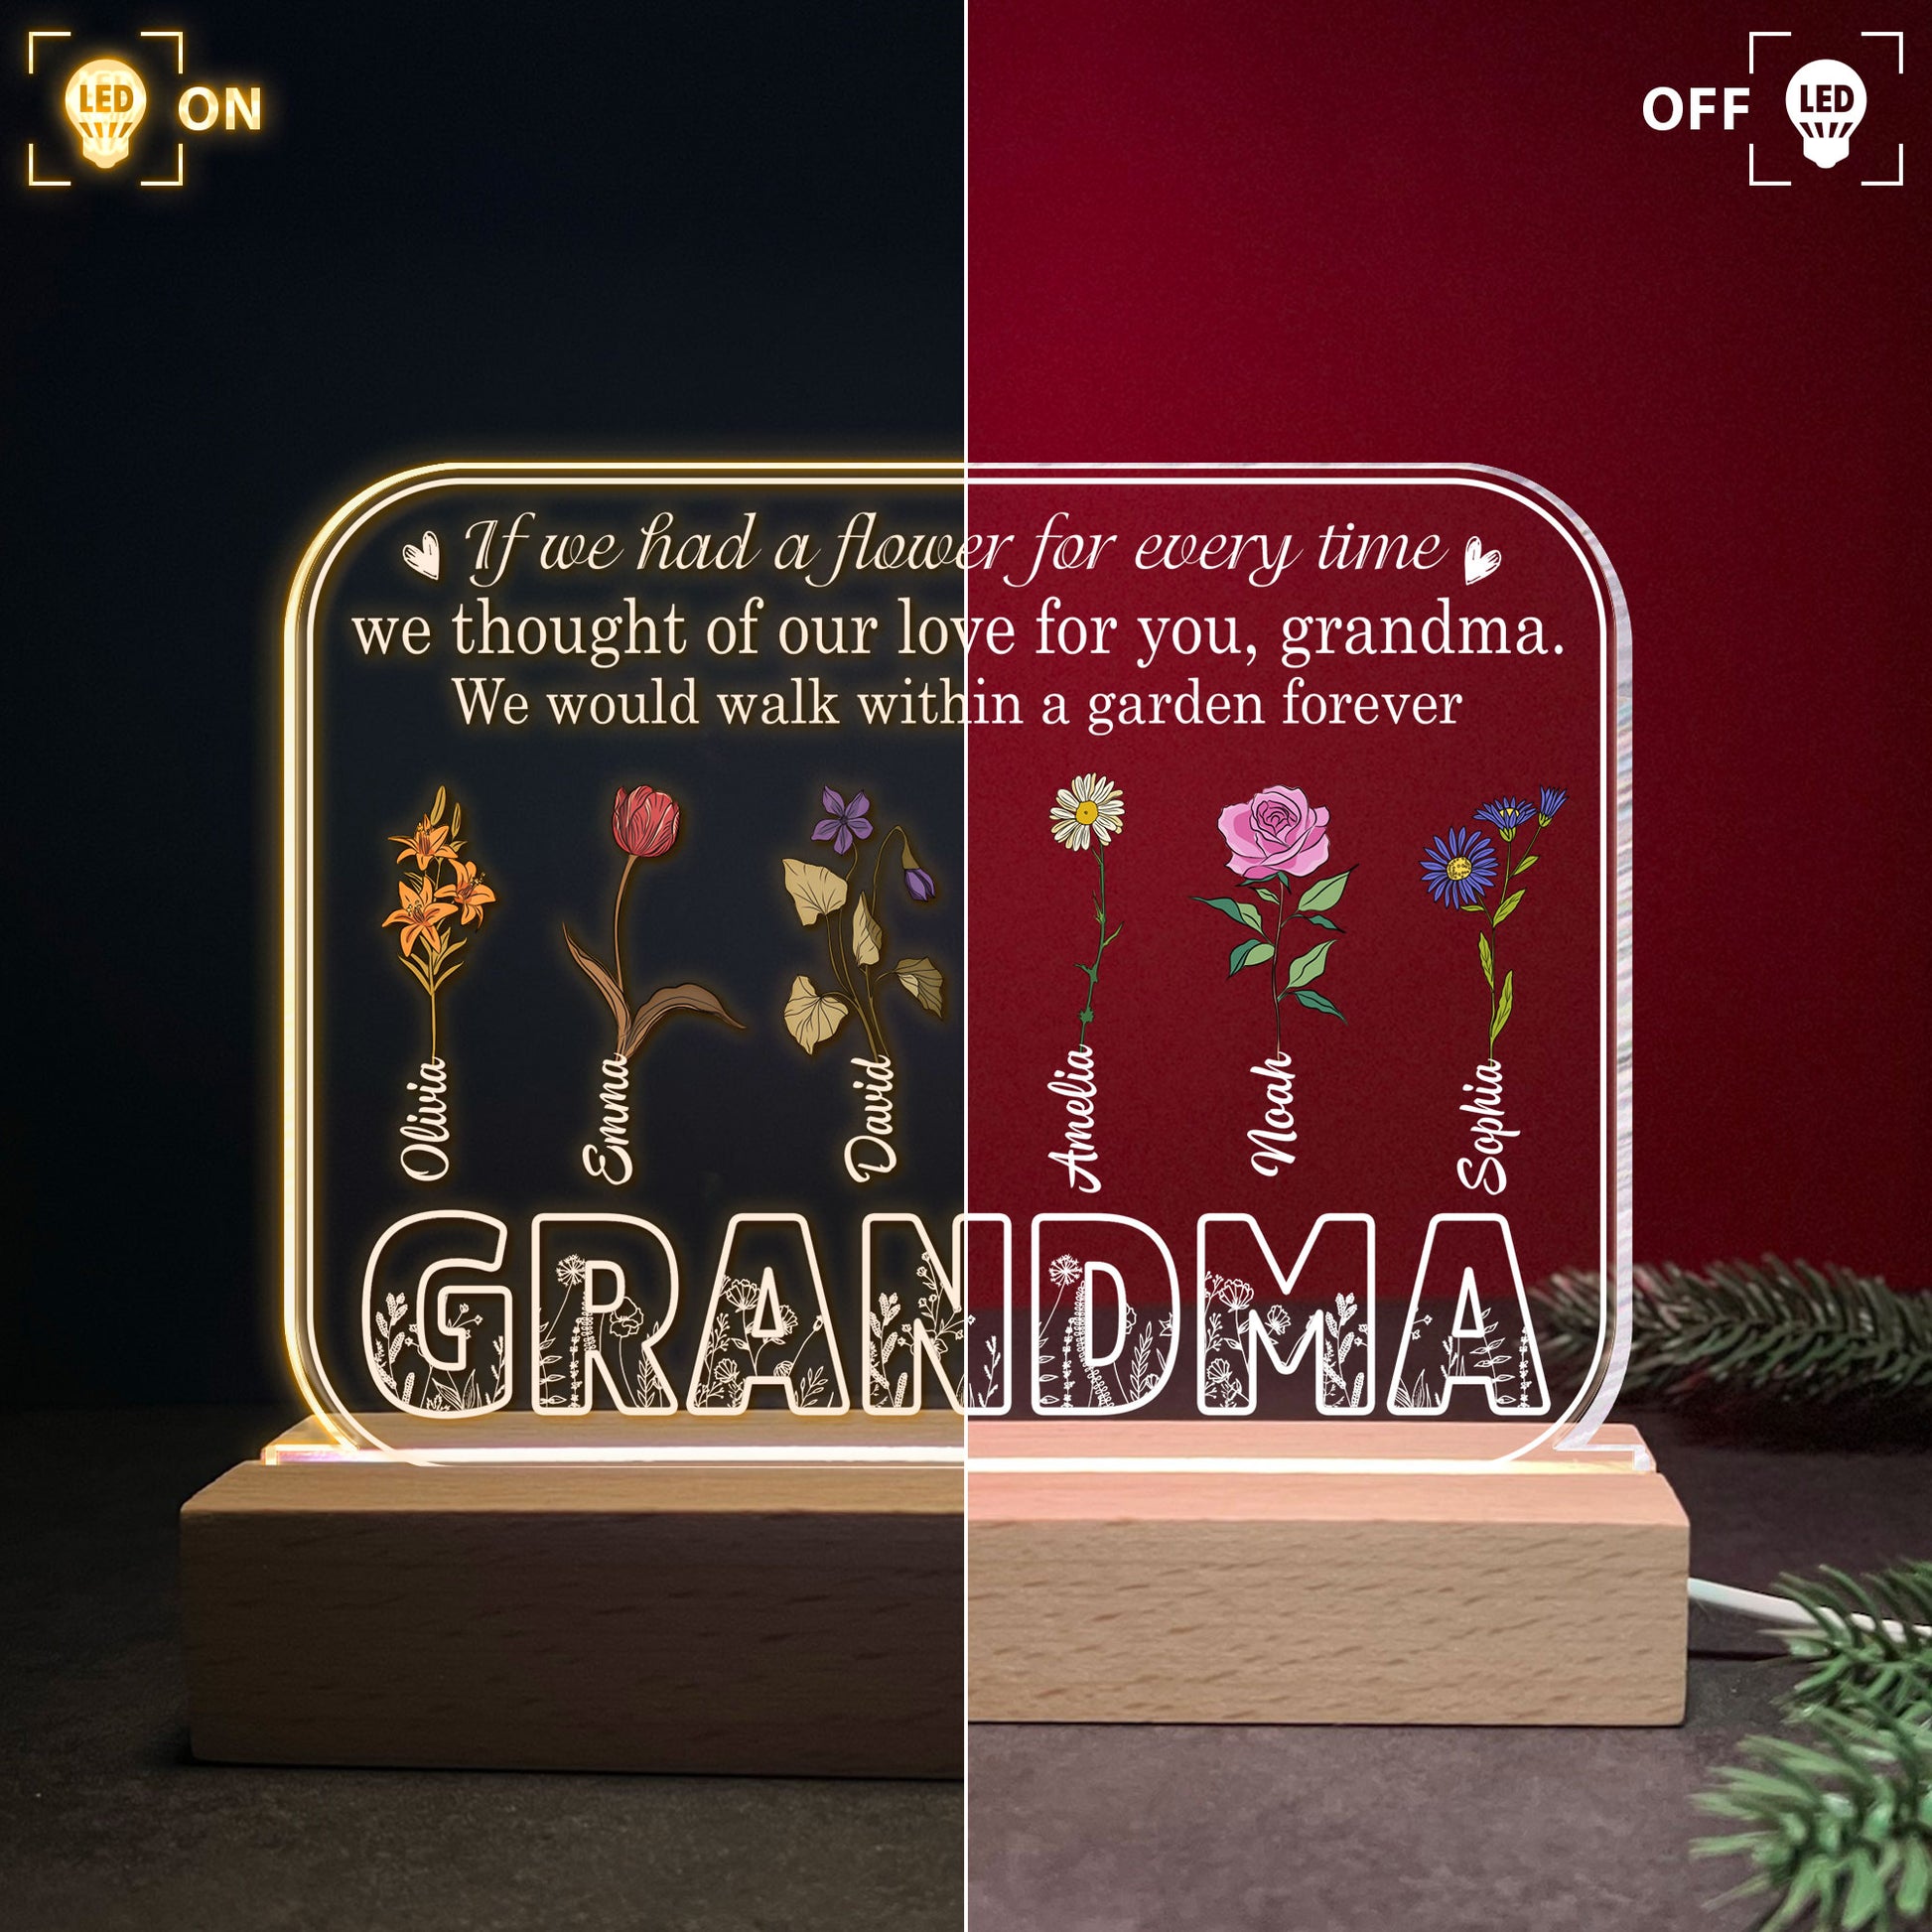 Walk Within A Garden Forever - Personalized 3D LED Light Wooden Base